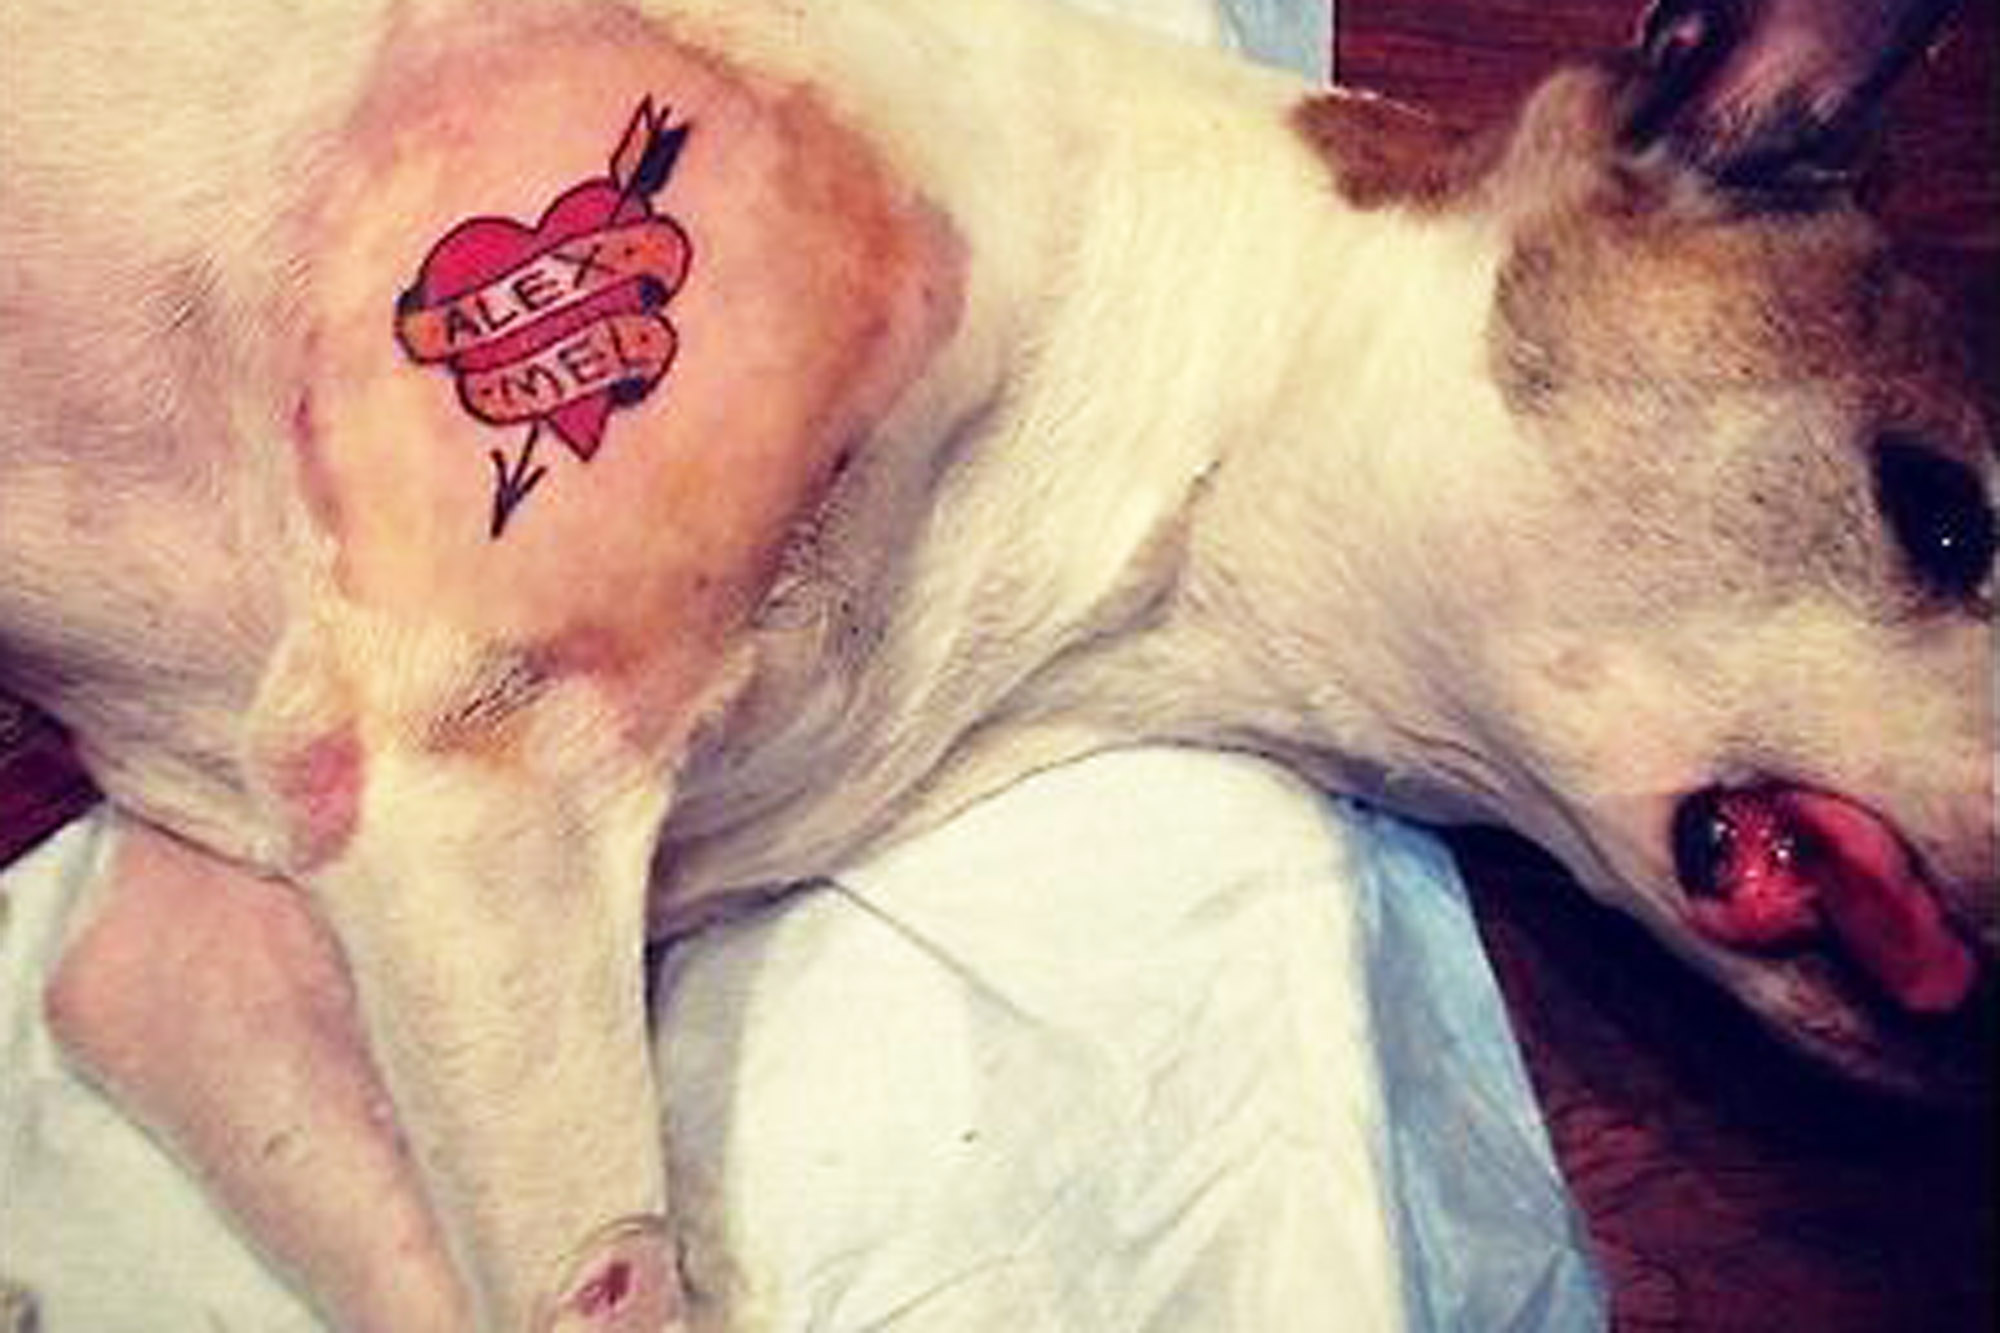 Do you – or should you – tattoo? | The Veterinarian Magazine